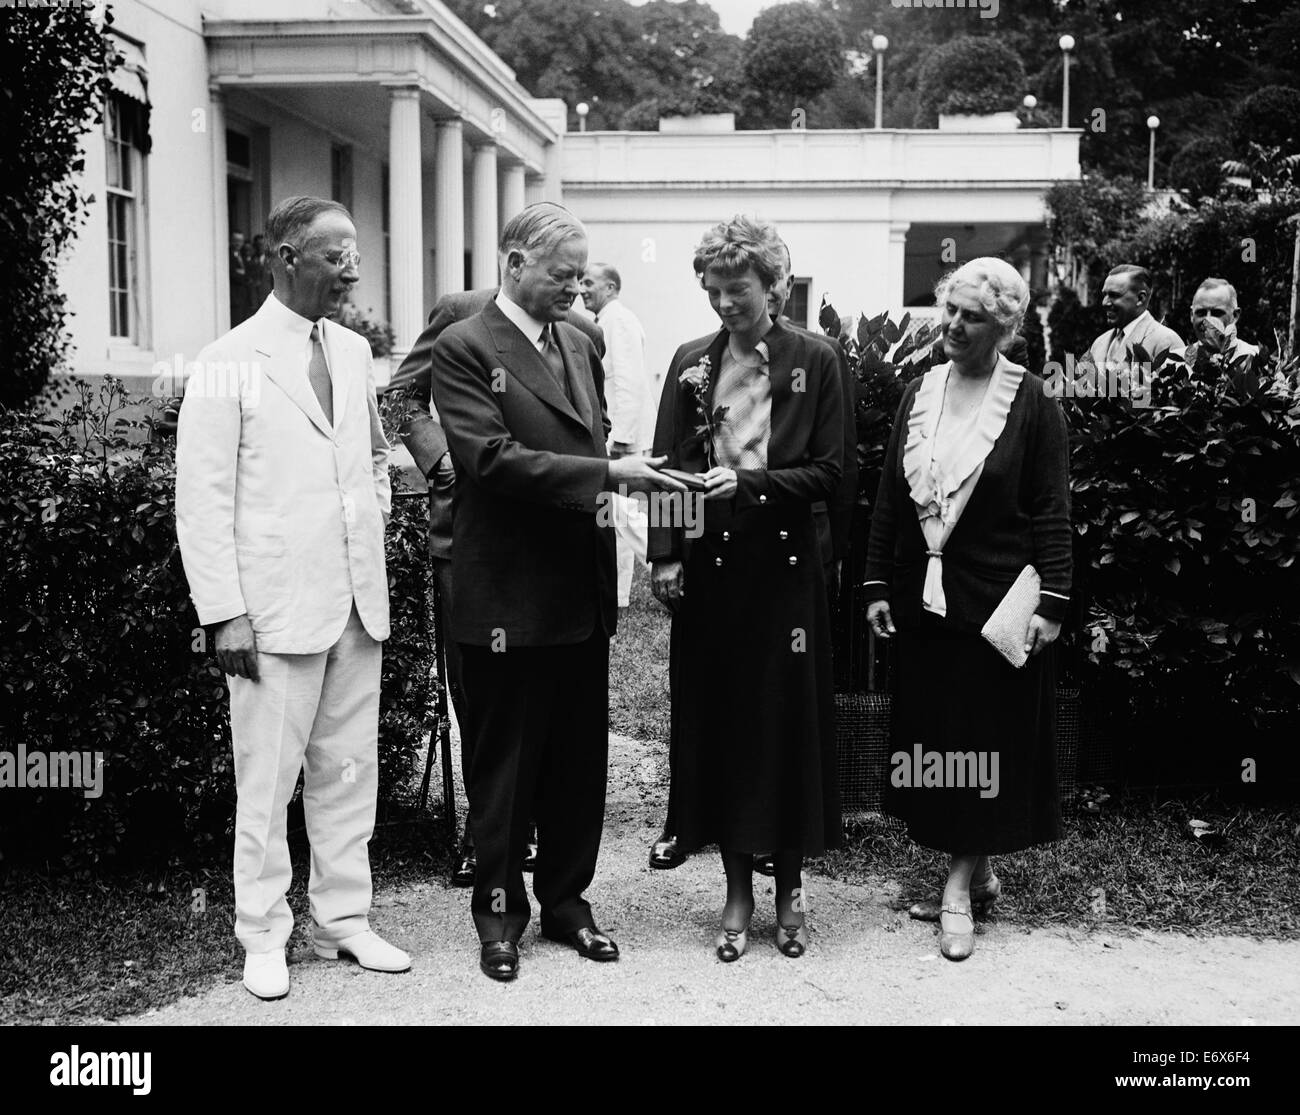 Vintage photo of American aviation pioneer and author Amelia Earhart (1897 – declared dead 1939) – Earhart and her navigator Fred Noonan famously vanished in 1937 while she was trying to become the first female to complete a circumnavigational flight of the globe. Earhart is pictured at The White House in June 1932 where President Herbert Hoover presented her with a National Geographic Society gold medal in recognition of her non-stop solo flight across the Atlantic. Stock Photo